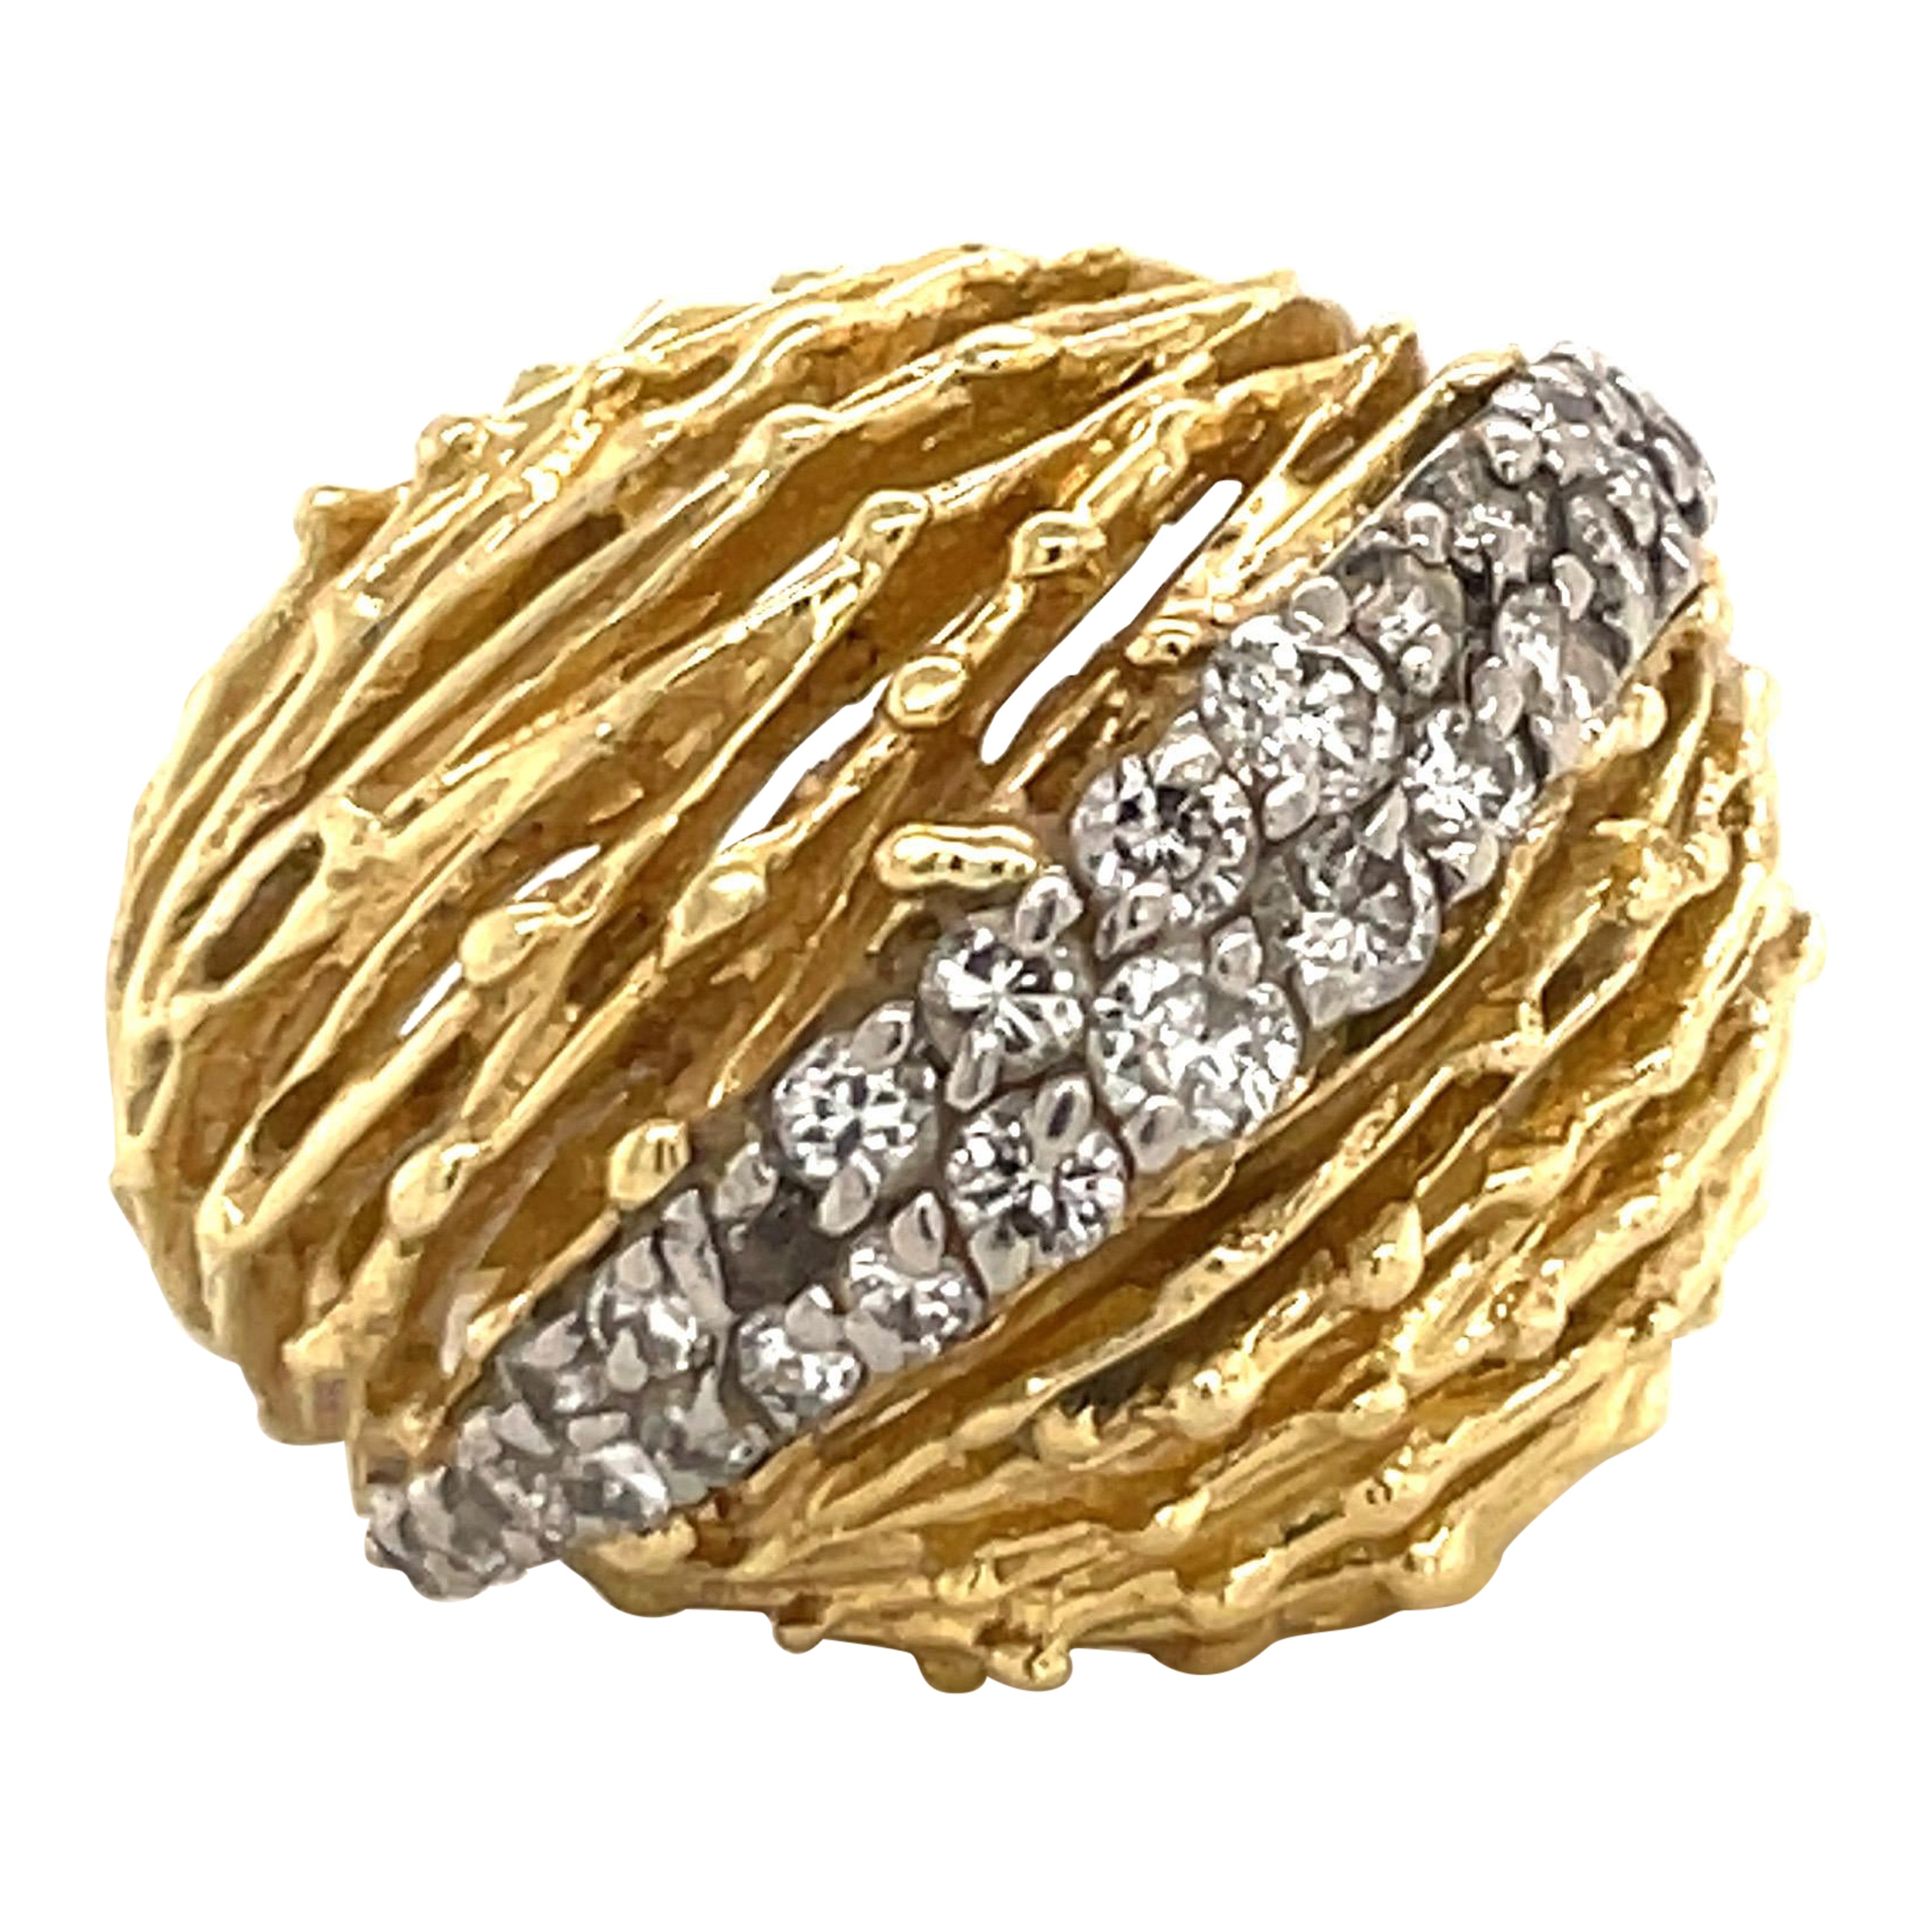 Round Cut 18 Karat Yellow Gold Diamond Dome Ring 0.60 Carats 17.1 Grams For Sale